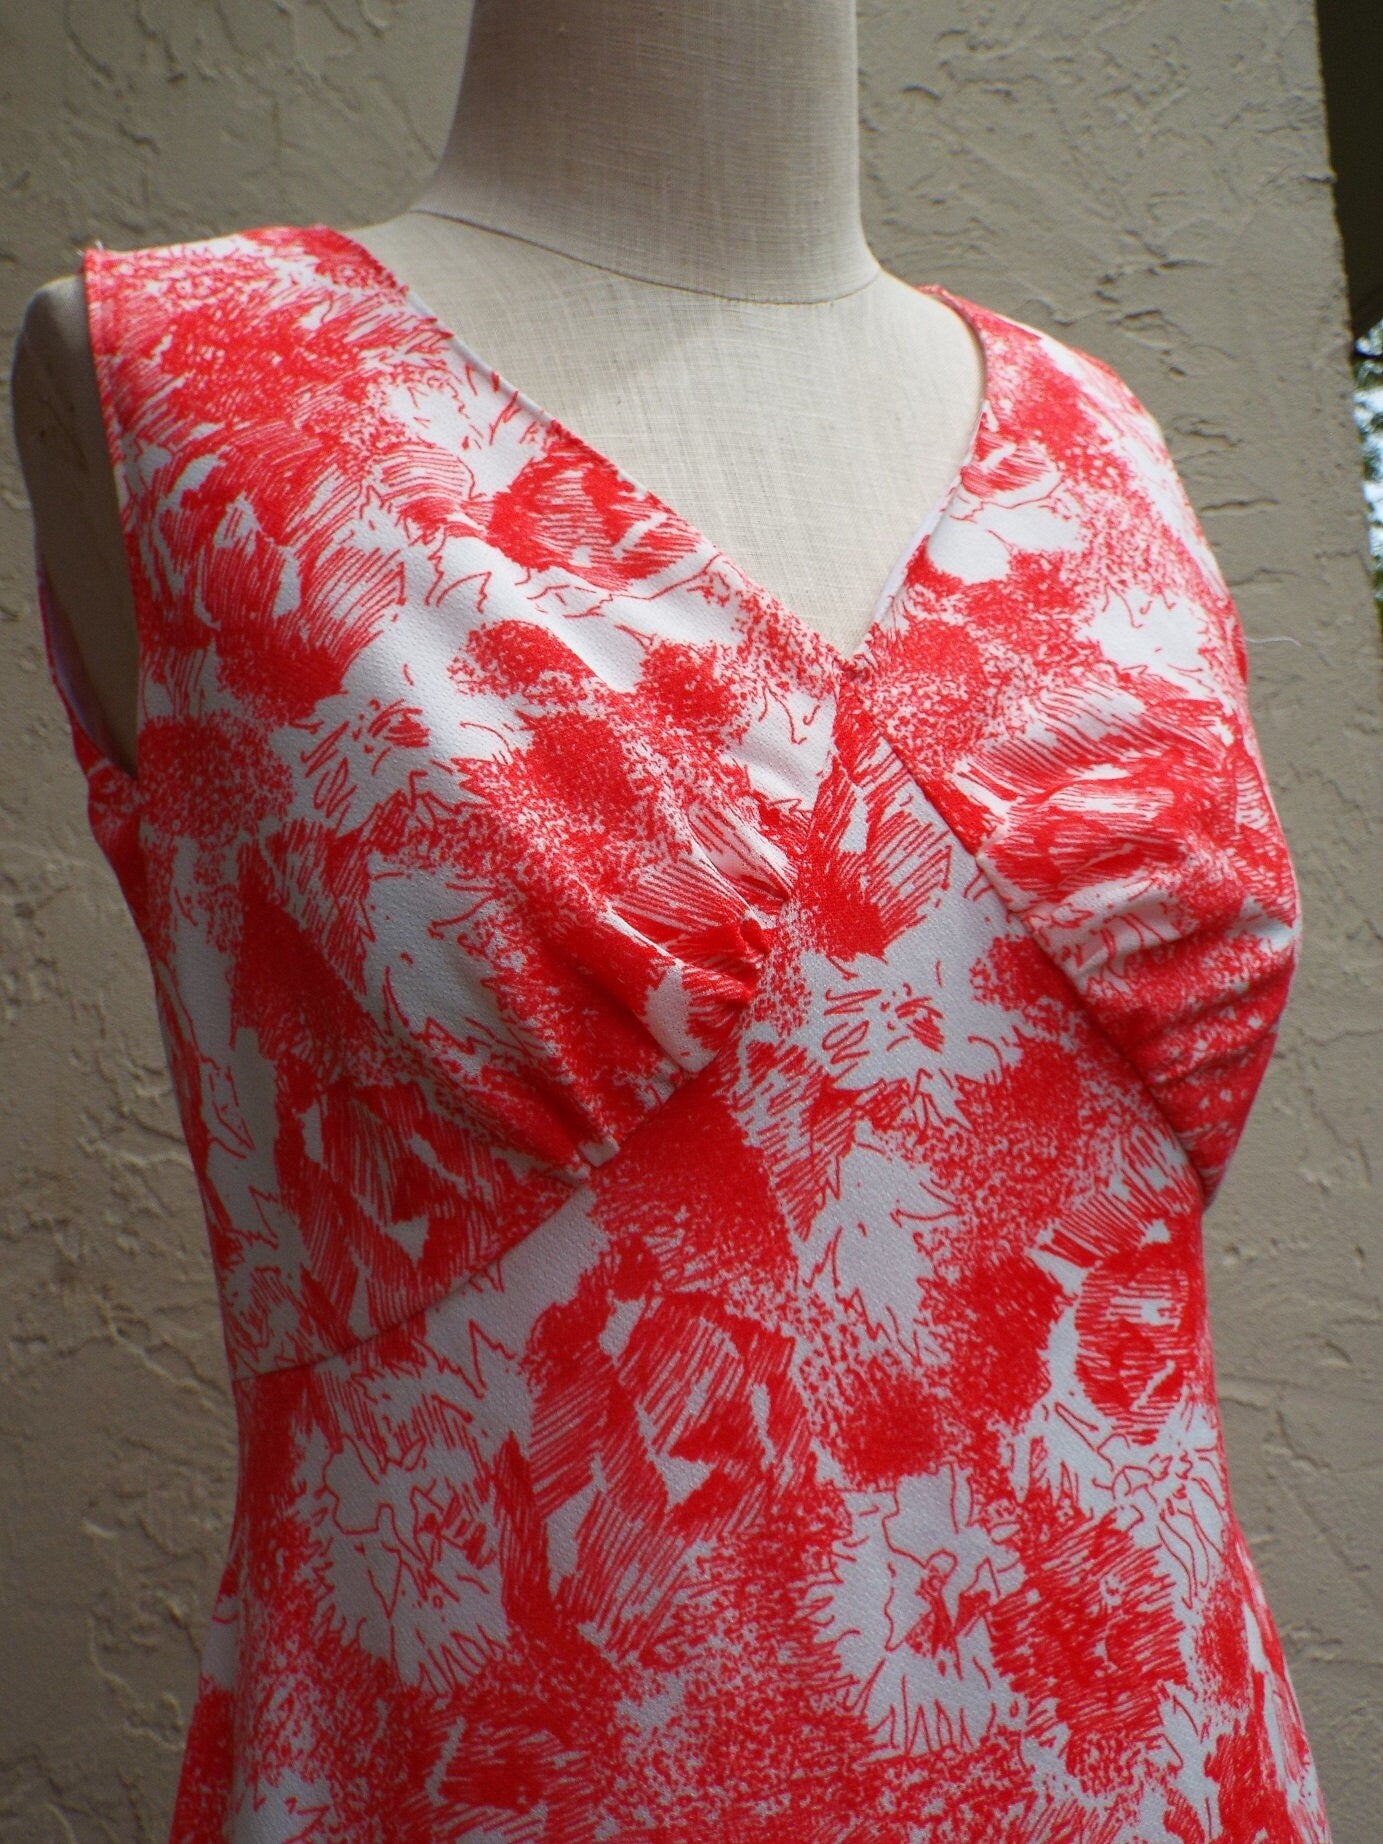 Vintage Sleeveless Red and White Floral Print Dress